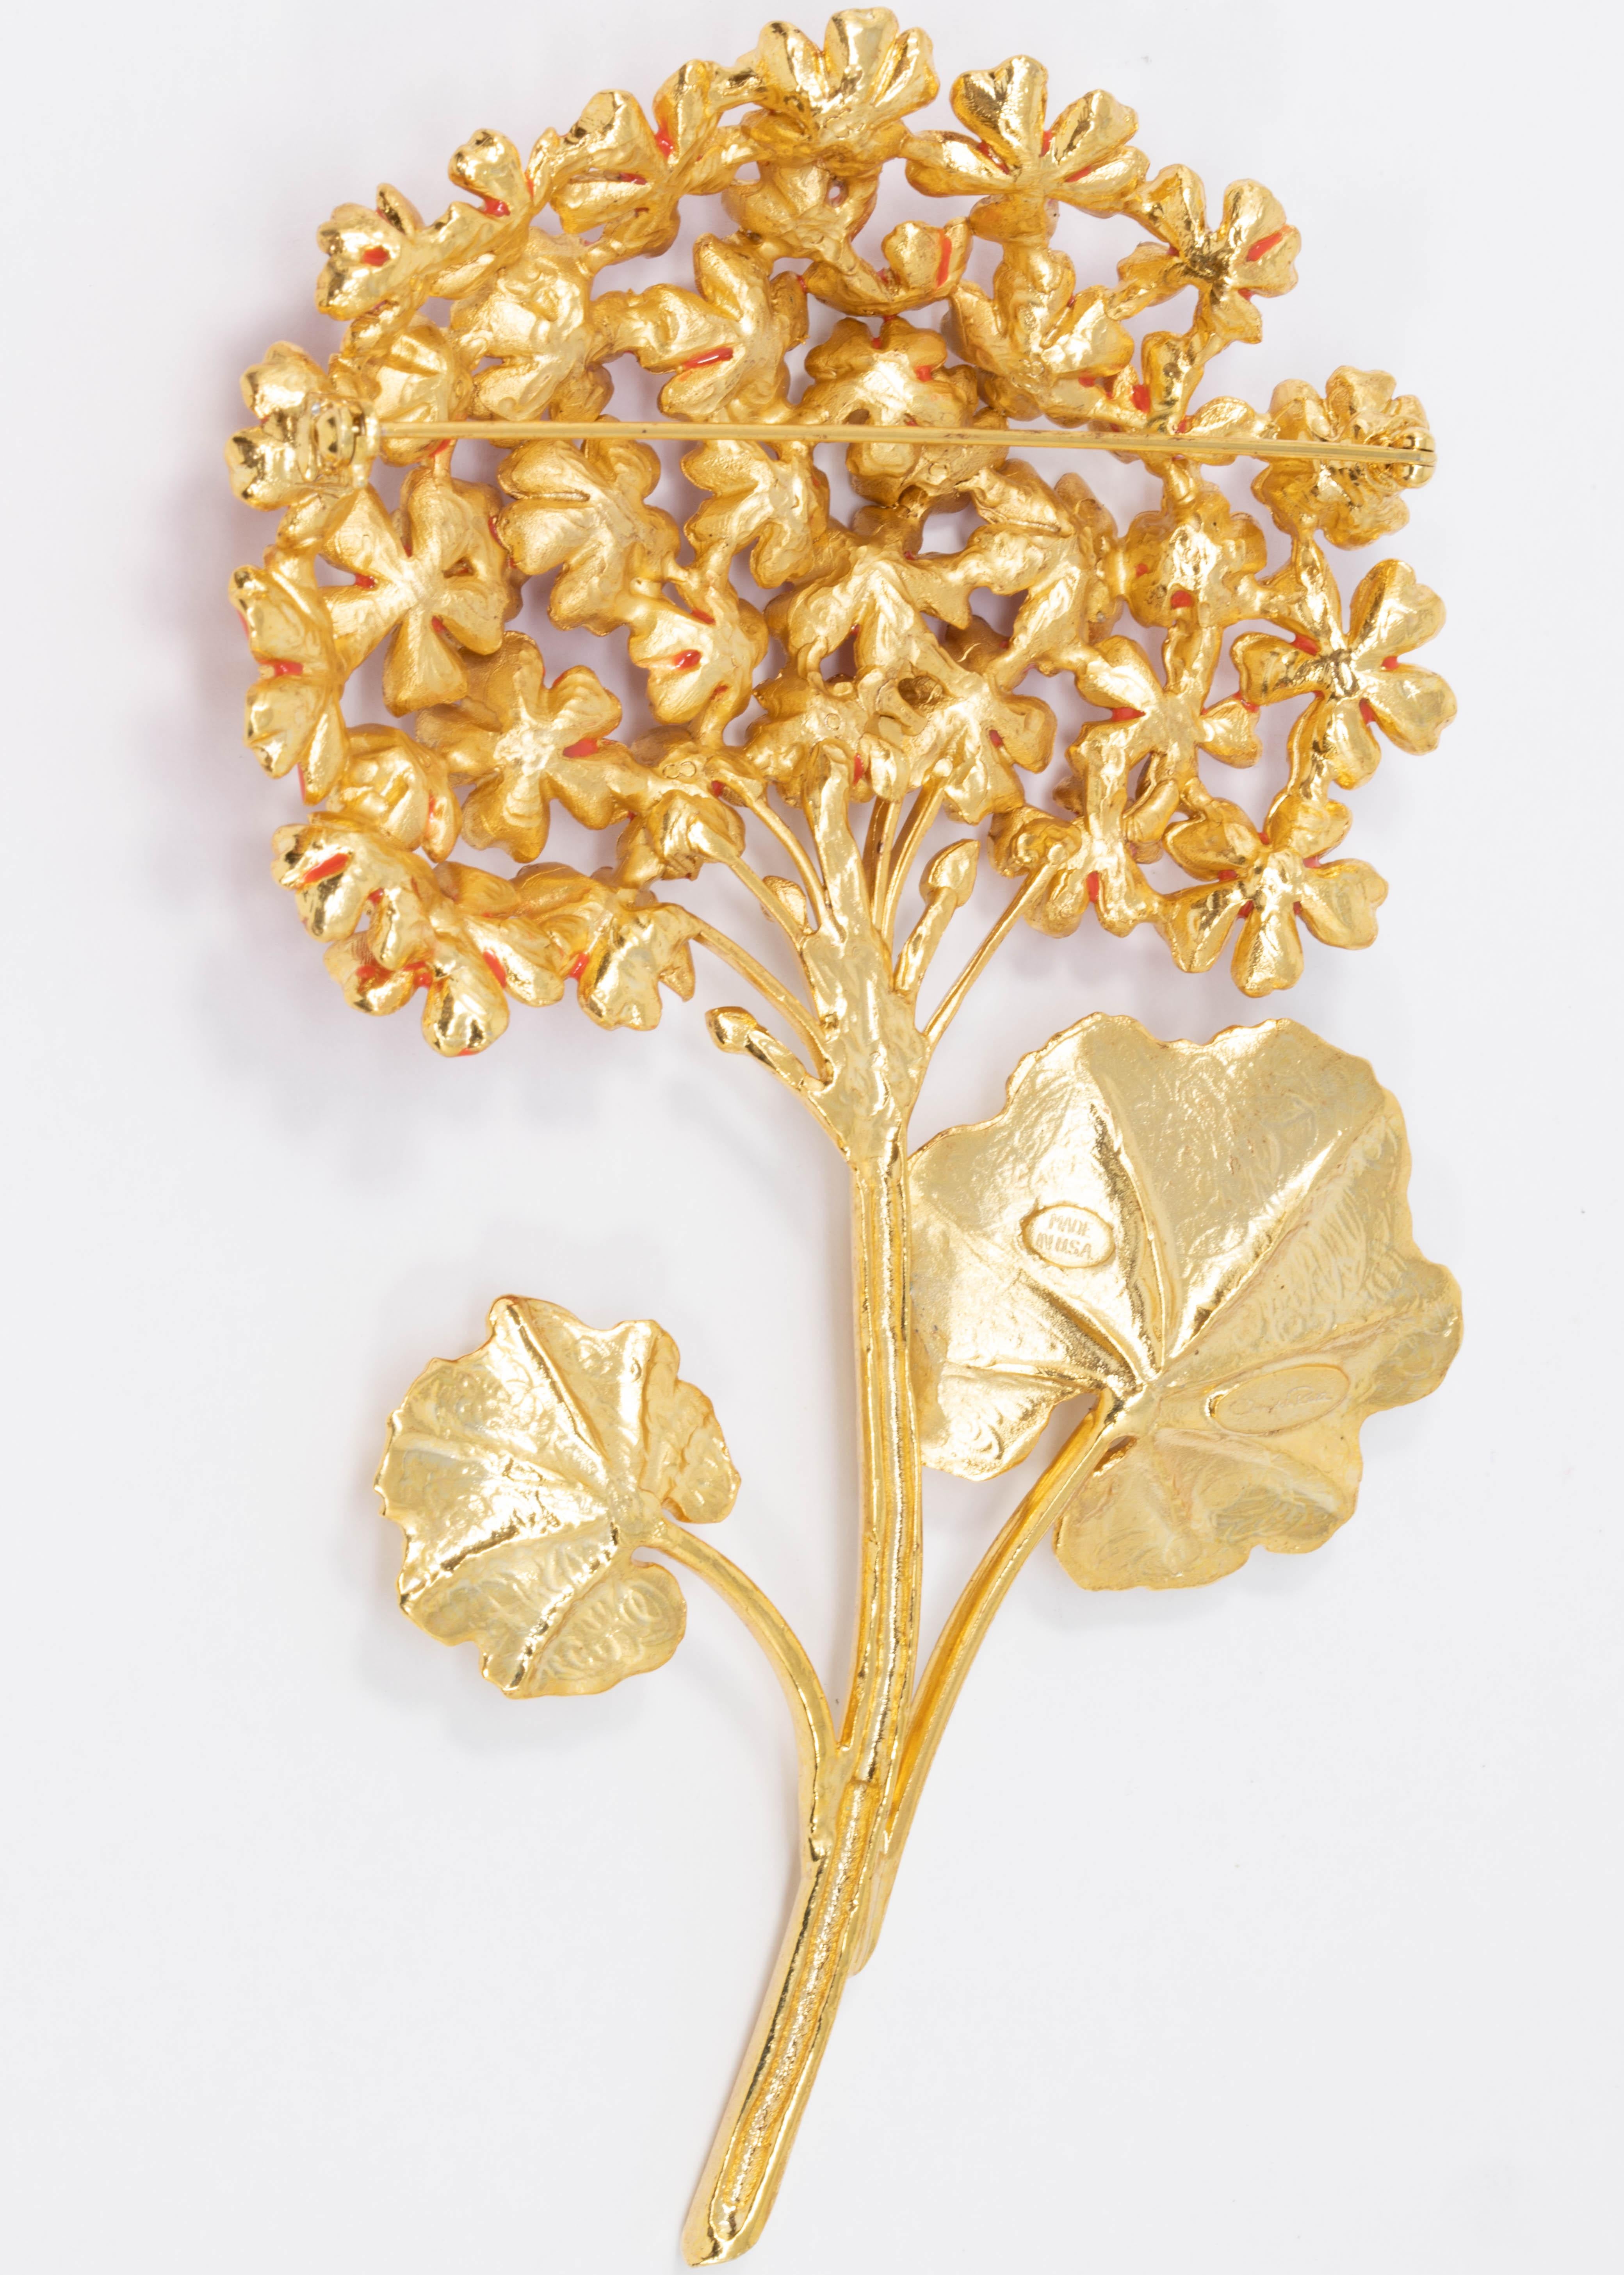 A magnificent bouquet of flowers! This Oscar de la Renta pin brooch features geranium flowers on a golden stem.

22KT gold plated. Hand-painted cayenne orange enamel.

Tags, Marks, Hallmarks: Oscar de la Renta, Made in USA